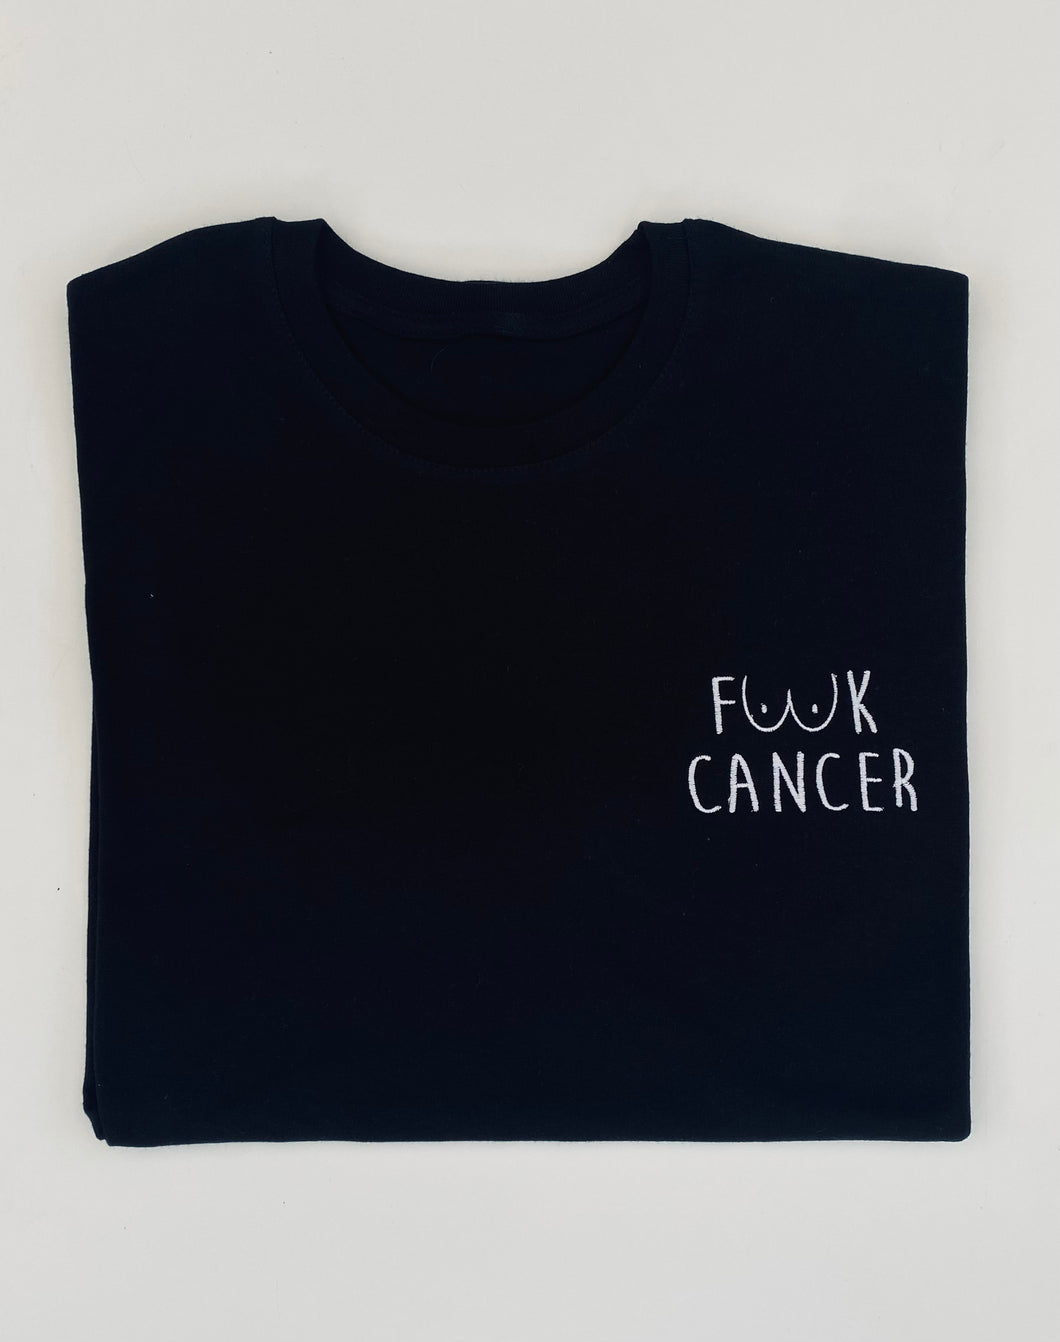 Charity Cancer Clothing